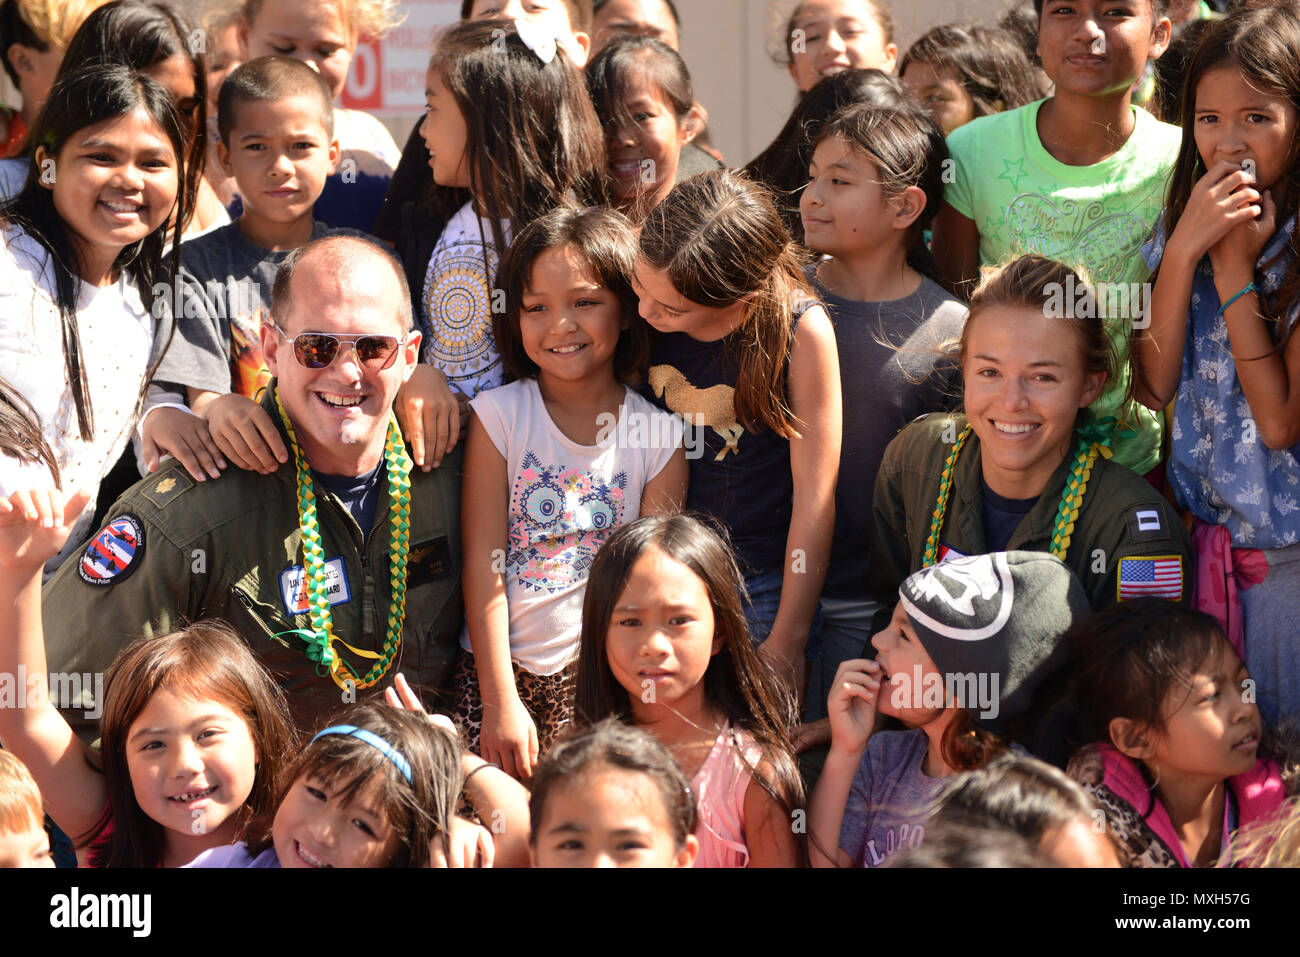 Lt. Cmdr. Roger Barr, left, and Lt. Lisa Davis, right, both MH-65 Dolphin helicopter pilots assigned to Coast Guard Air Station Barbers Point, take a photo with local children during a career day at Lanai High and Elementary School in Lanai, Nov. 2, 2016. (U.S. Coast Guard photo by Petty Officer 2nd Class Tara Molle) Stock Photo